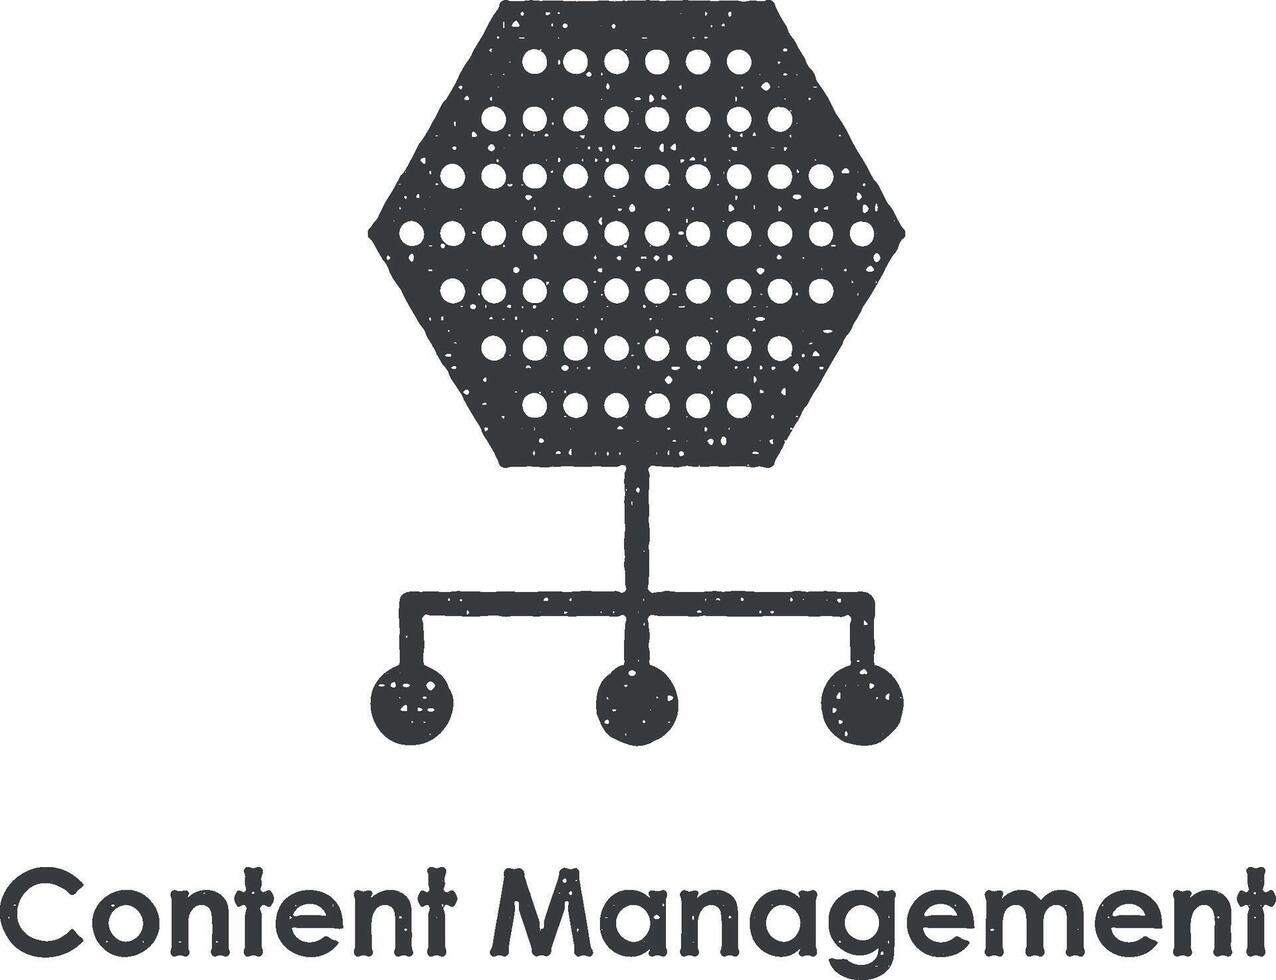 hexagon, connection, content management vector icon illustration with stamp effect